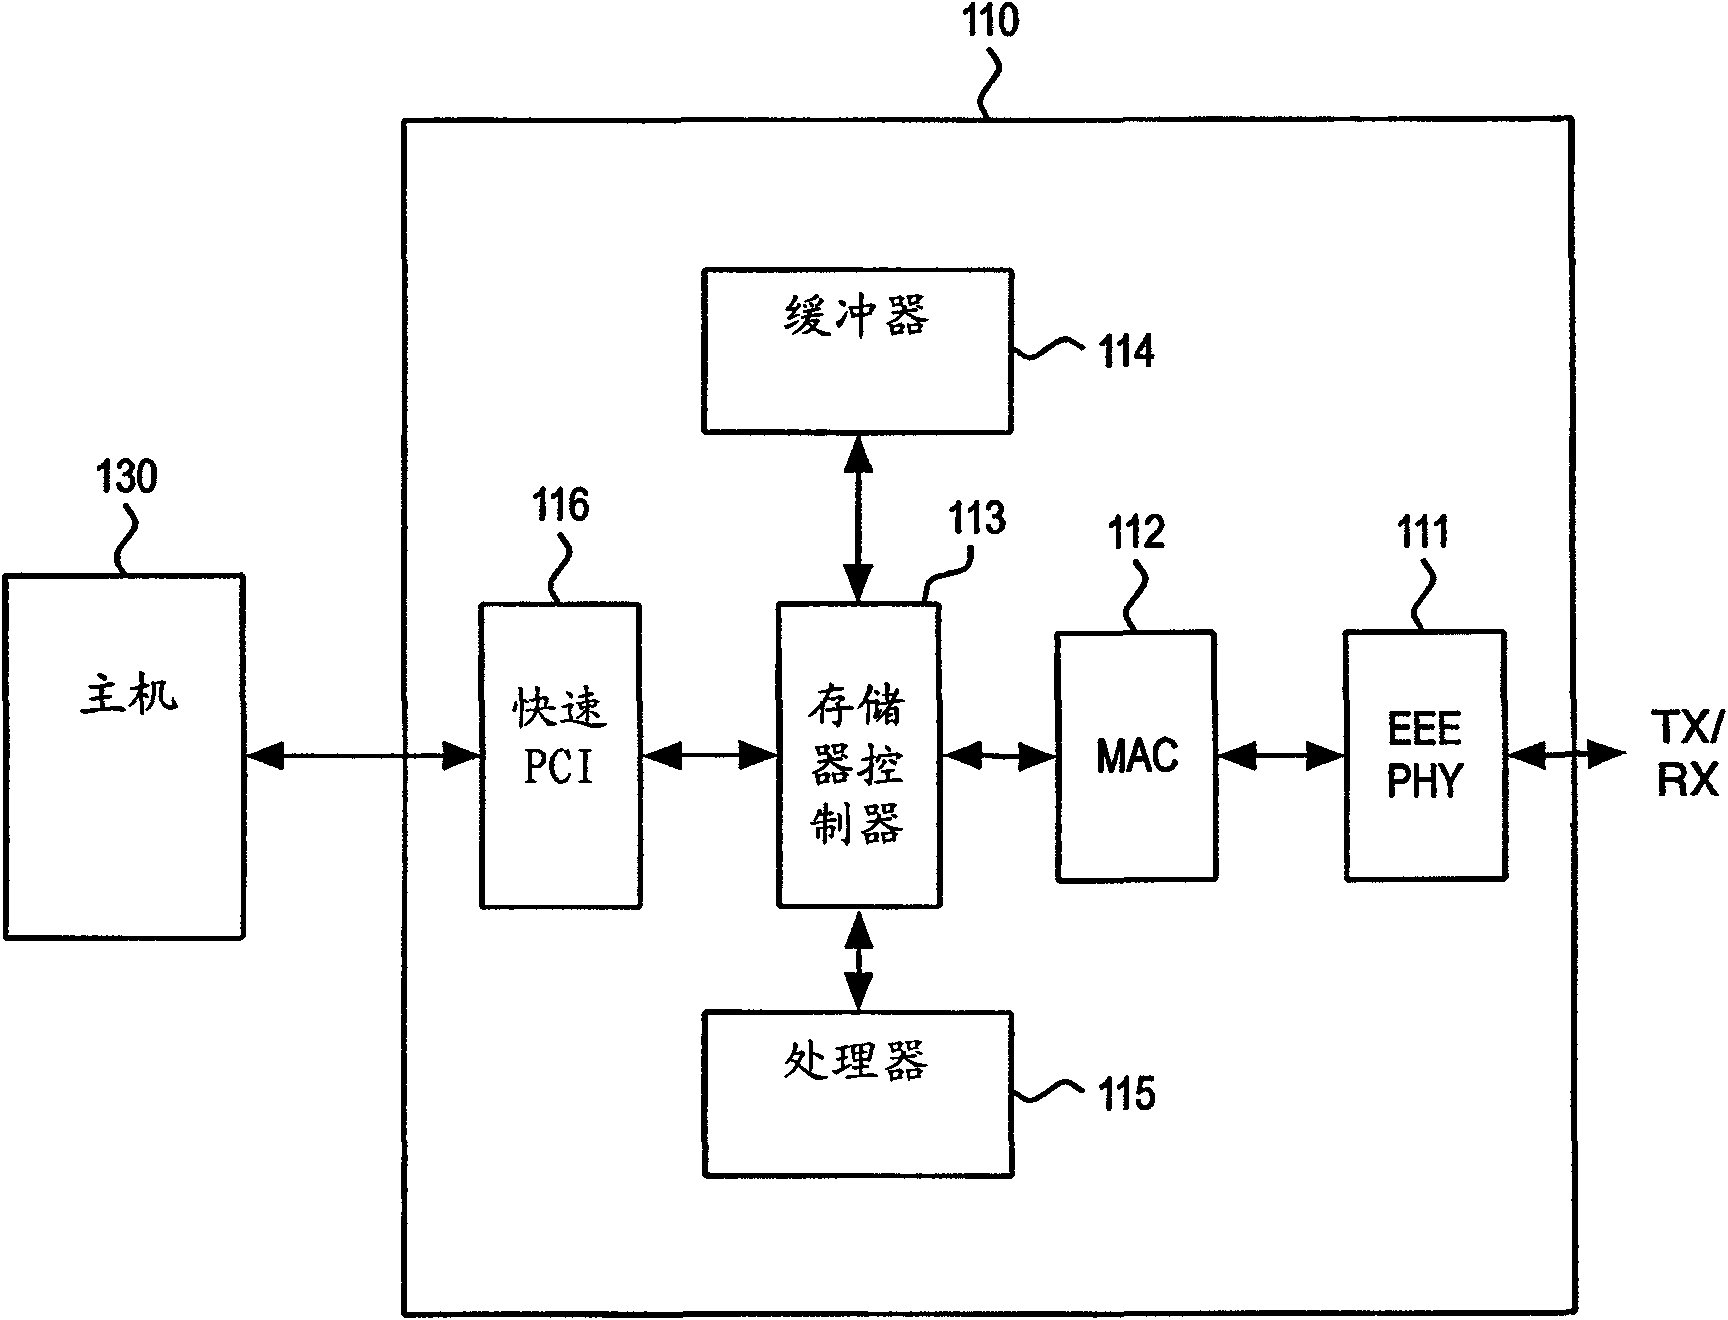 Method for energy efficient Ethernet and physical layer equipment for enery efficient ethernet